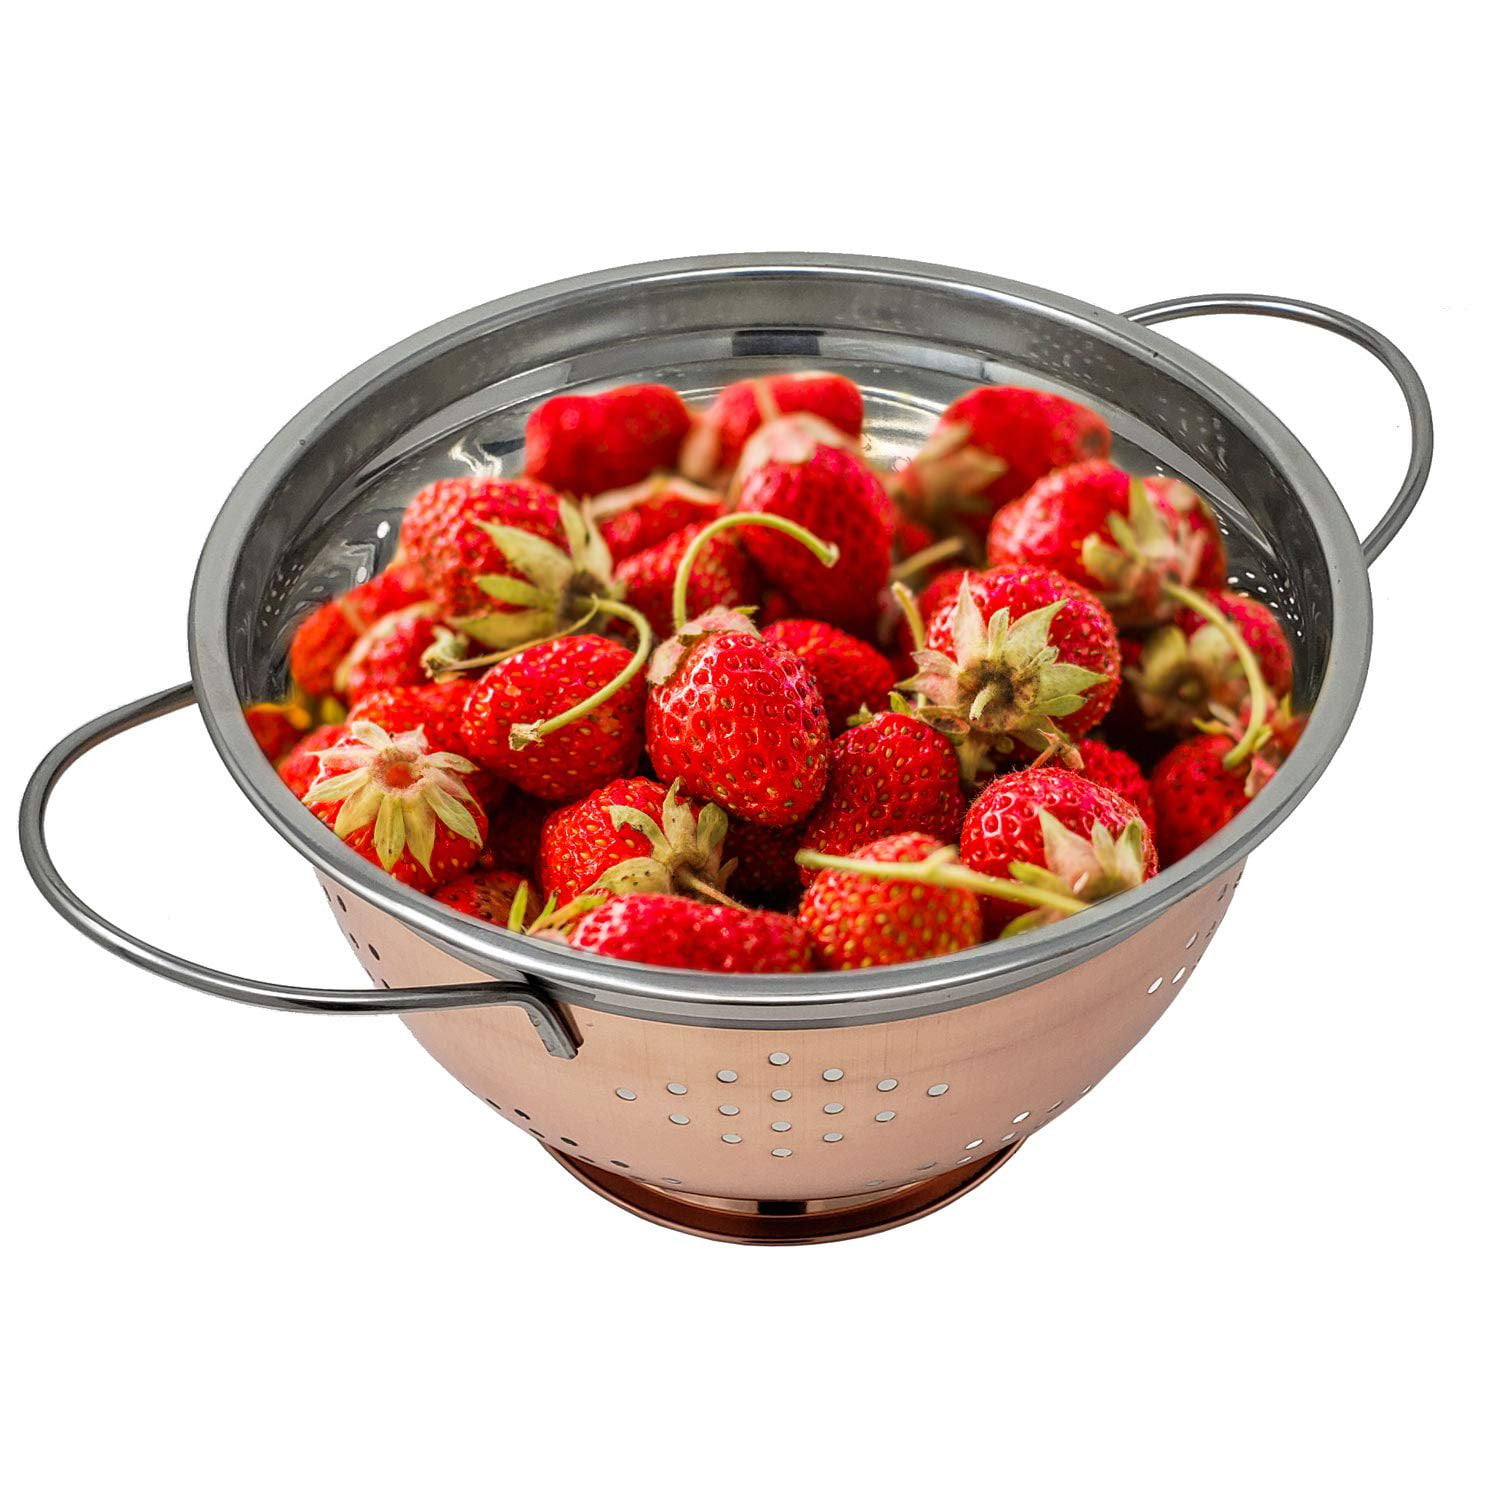 Copper plated stainless steel berry colander 